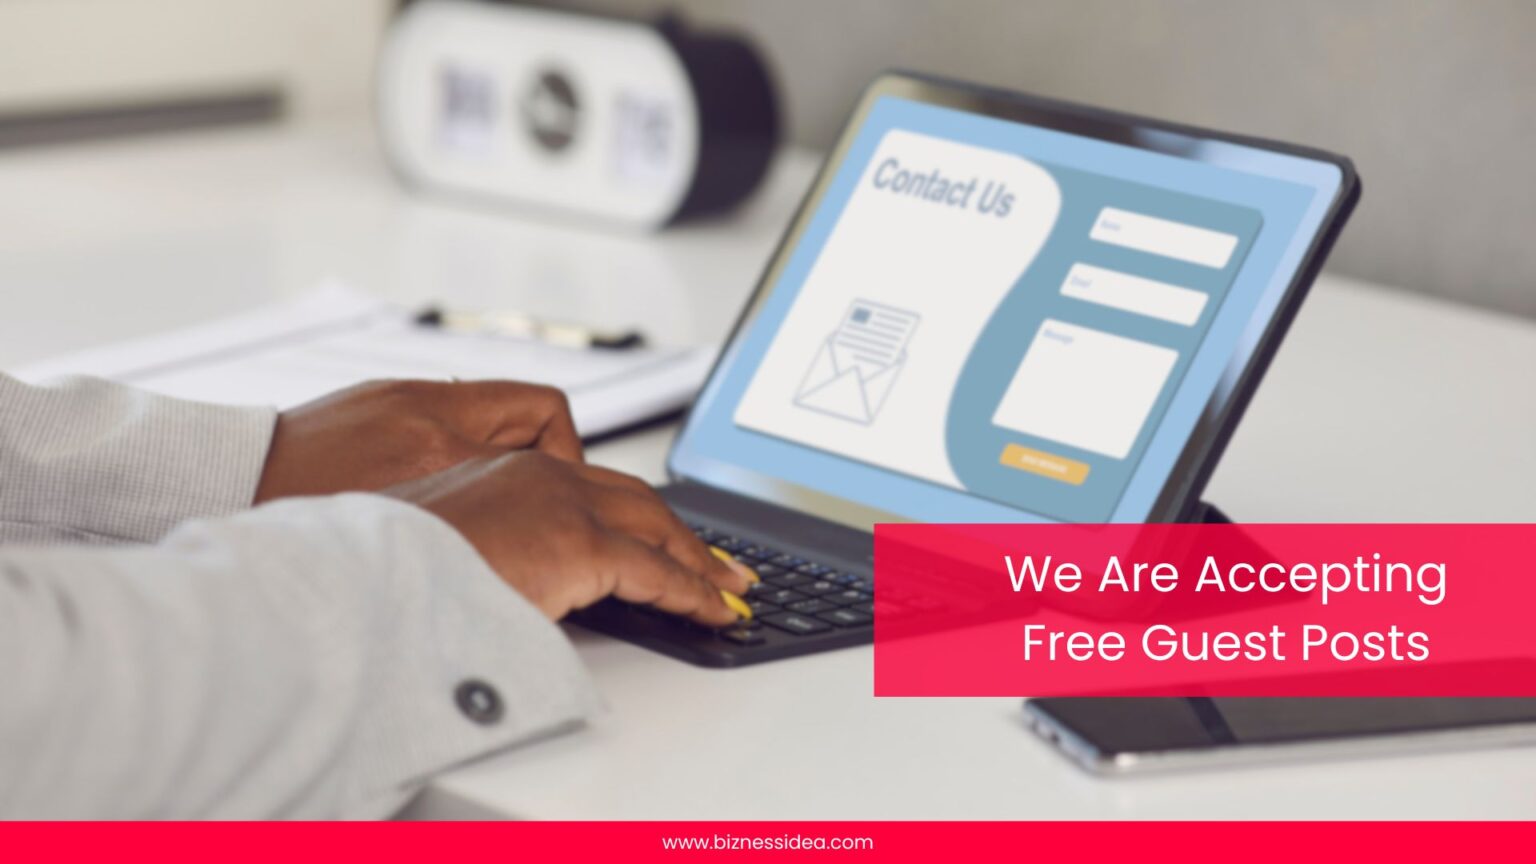 We invite all passionate writers, content writers, freelancers or bloggers to write for us and share their expertise as a free guest post writer on our platform.